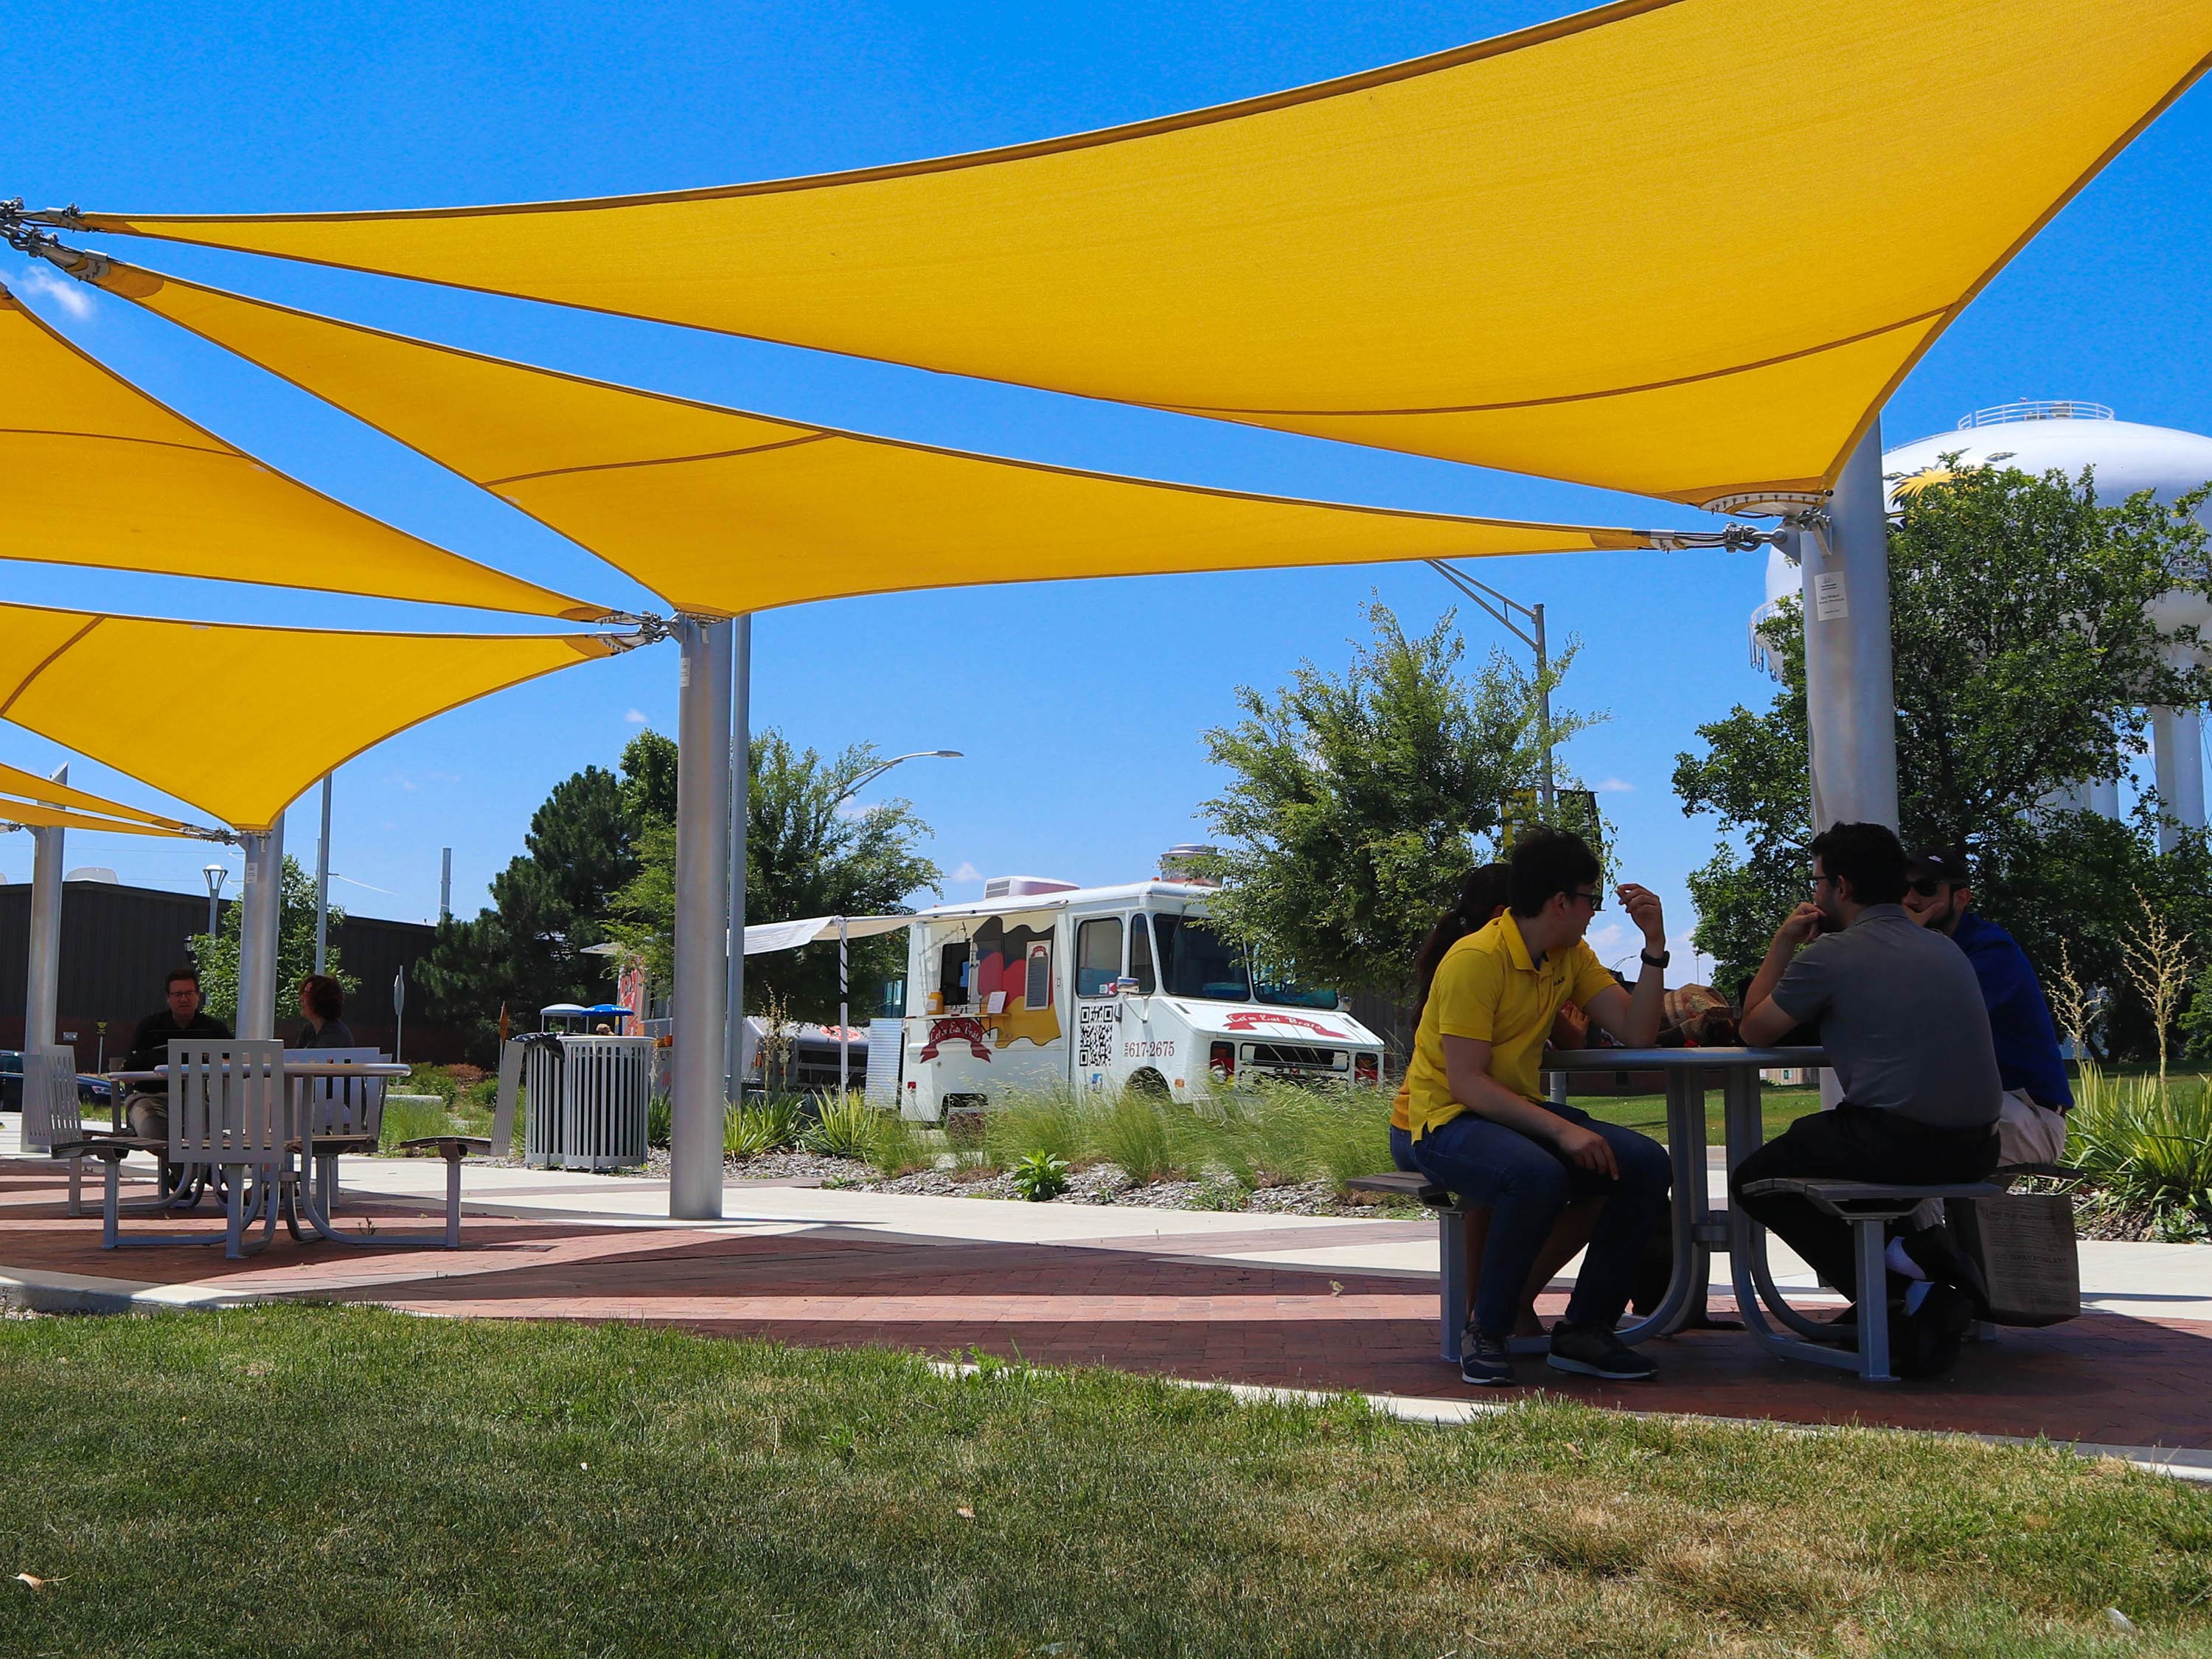 Visitors to the Food Truck Plaza dine underneath the yellow sun shade canopy